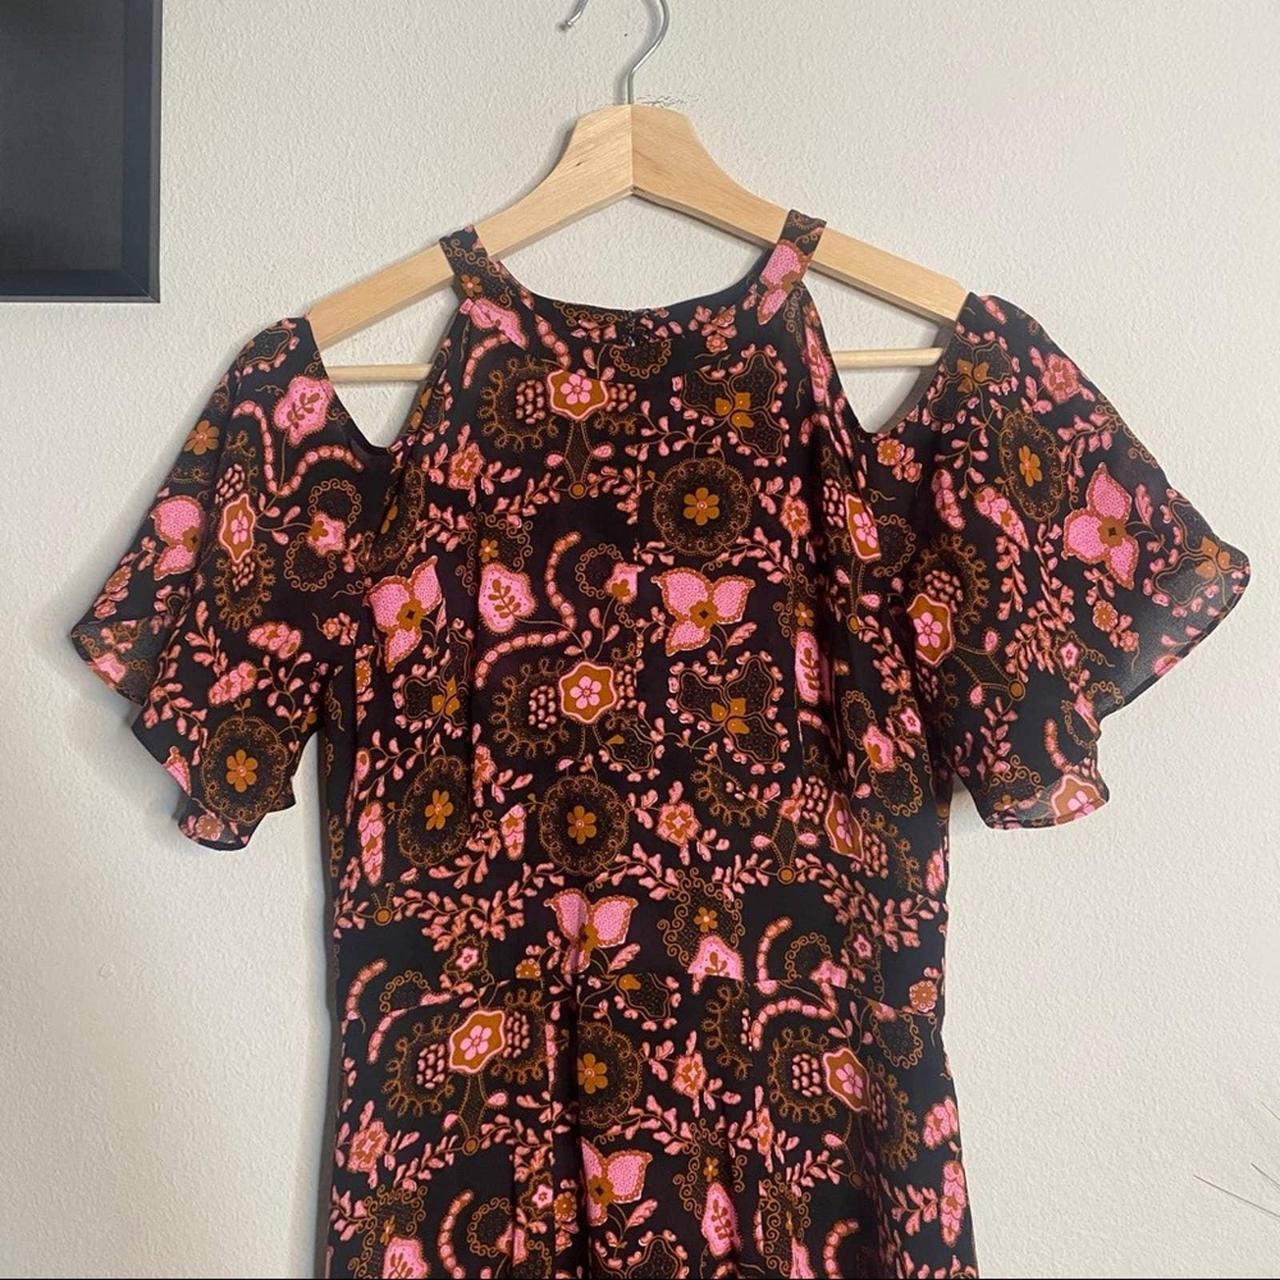 Product Image 2 - Gorgeous floral printed, cold shoulder